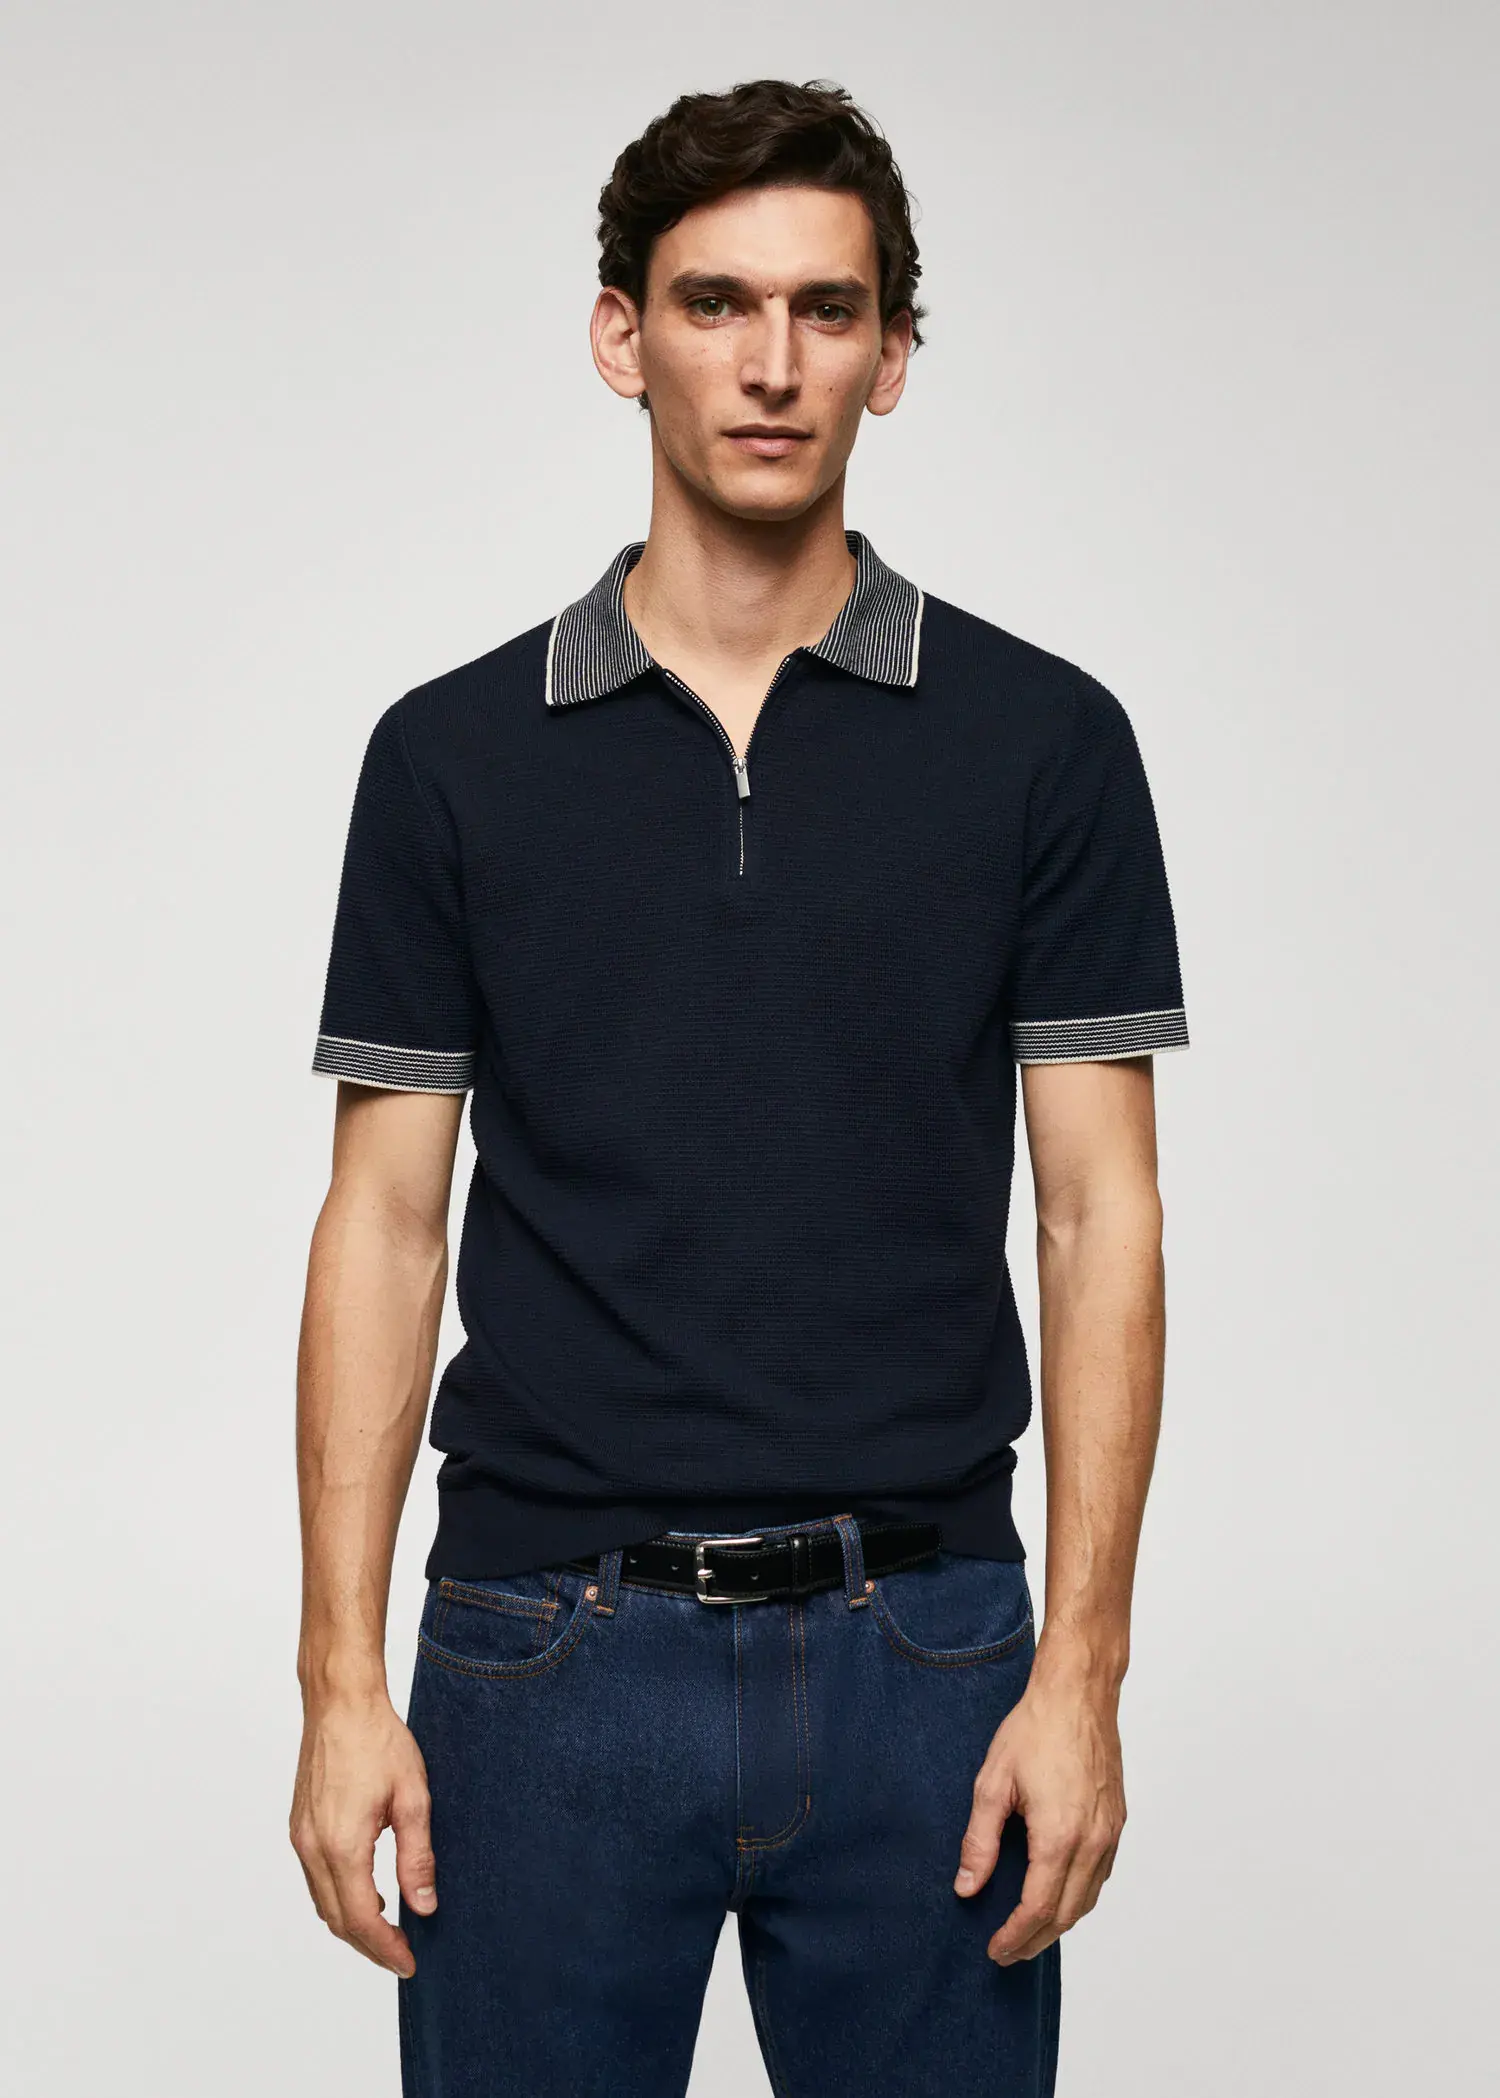 Mango Fine-knit polo shirt with zip. a young man wearing a black polo shirt and jeans. 